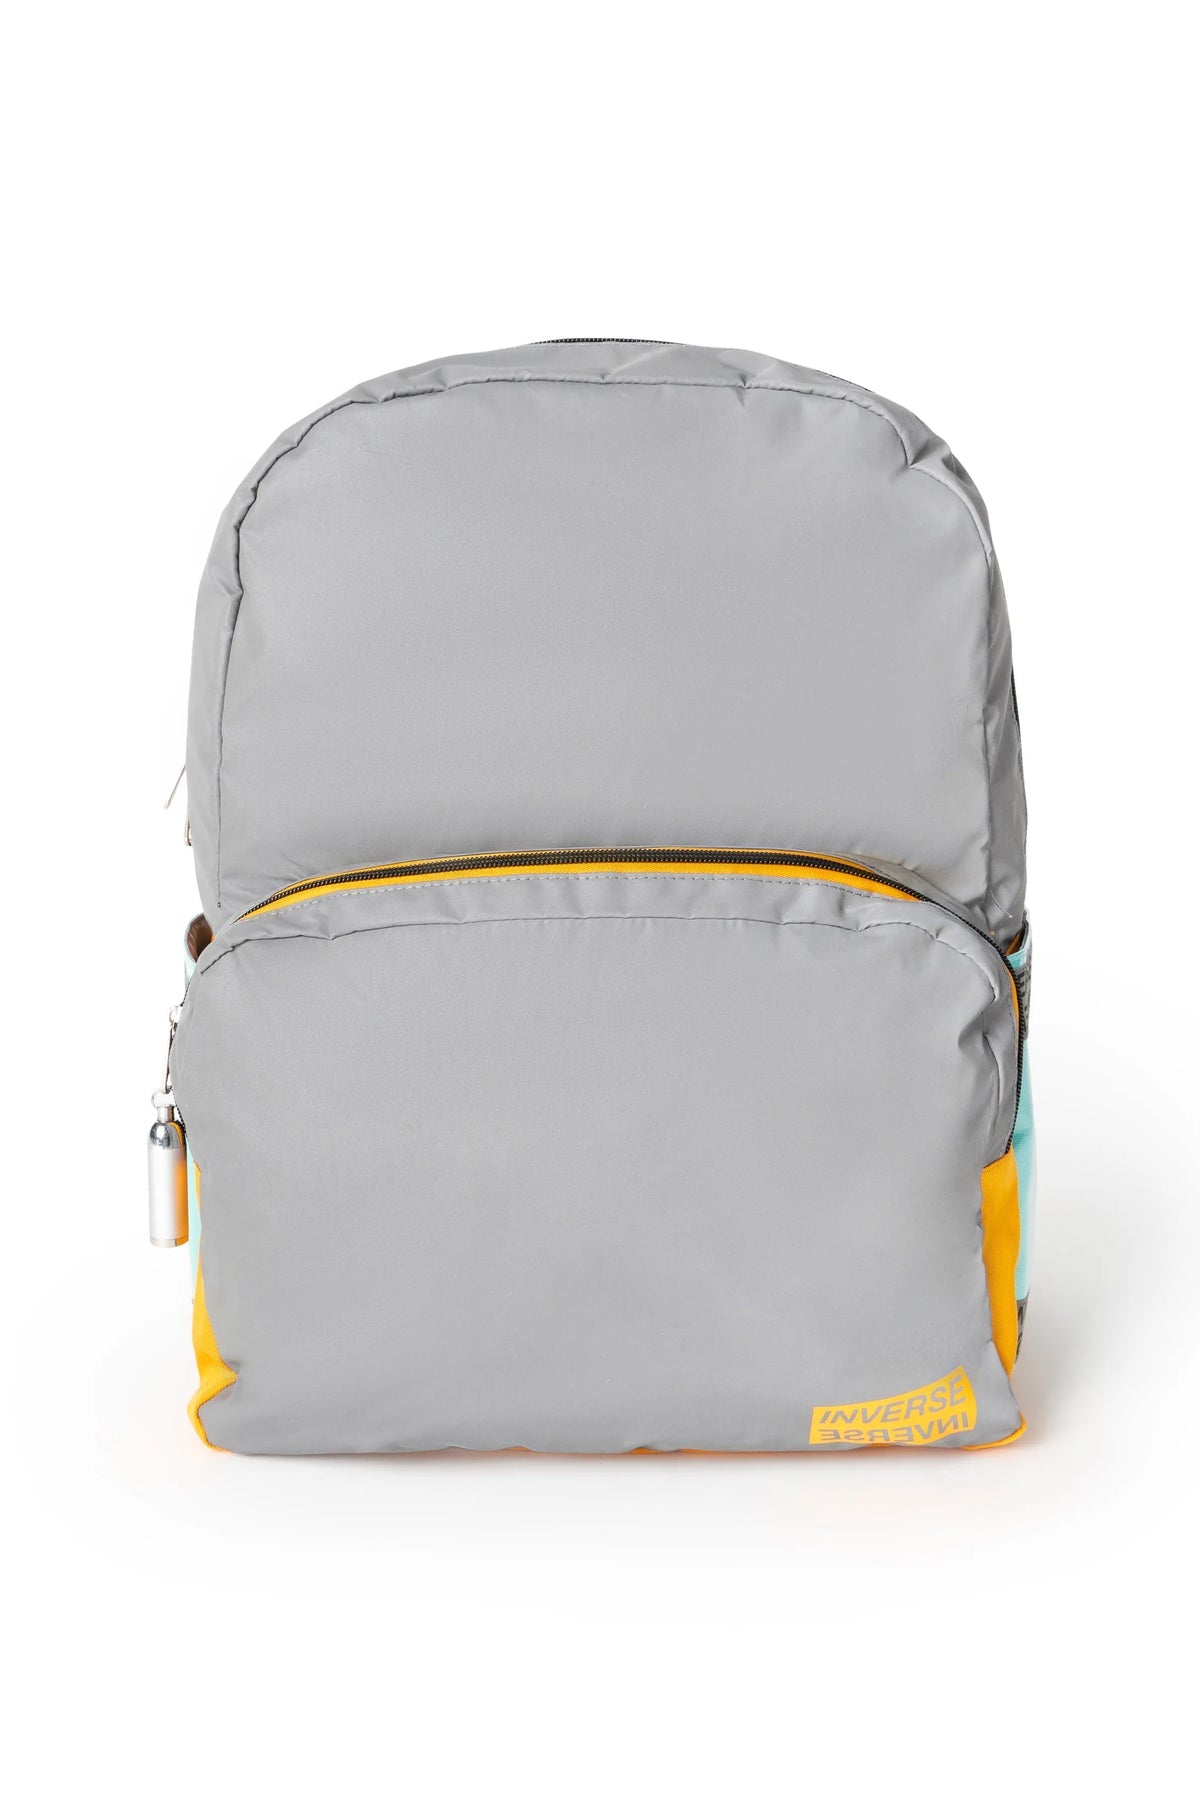 Campus Grey Backpack 1 Large Compartment Fit A4